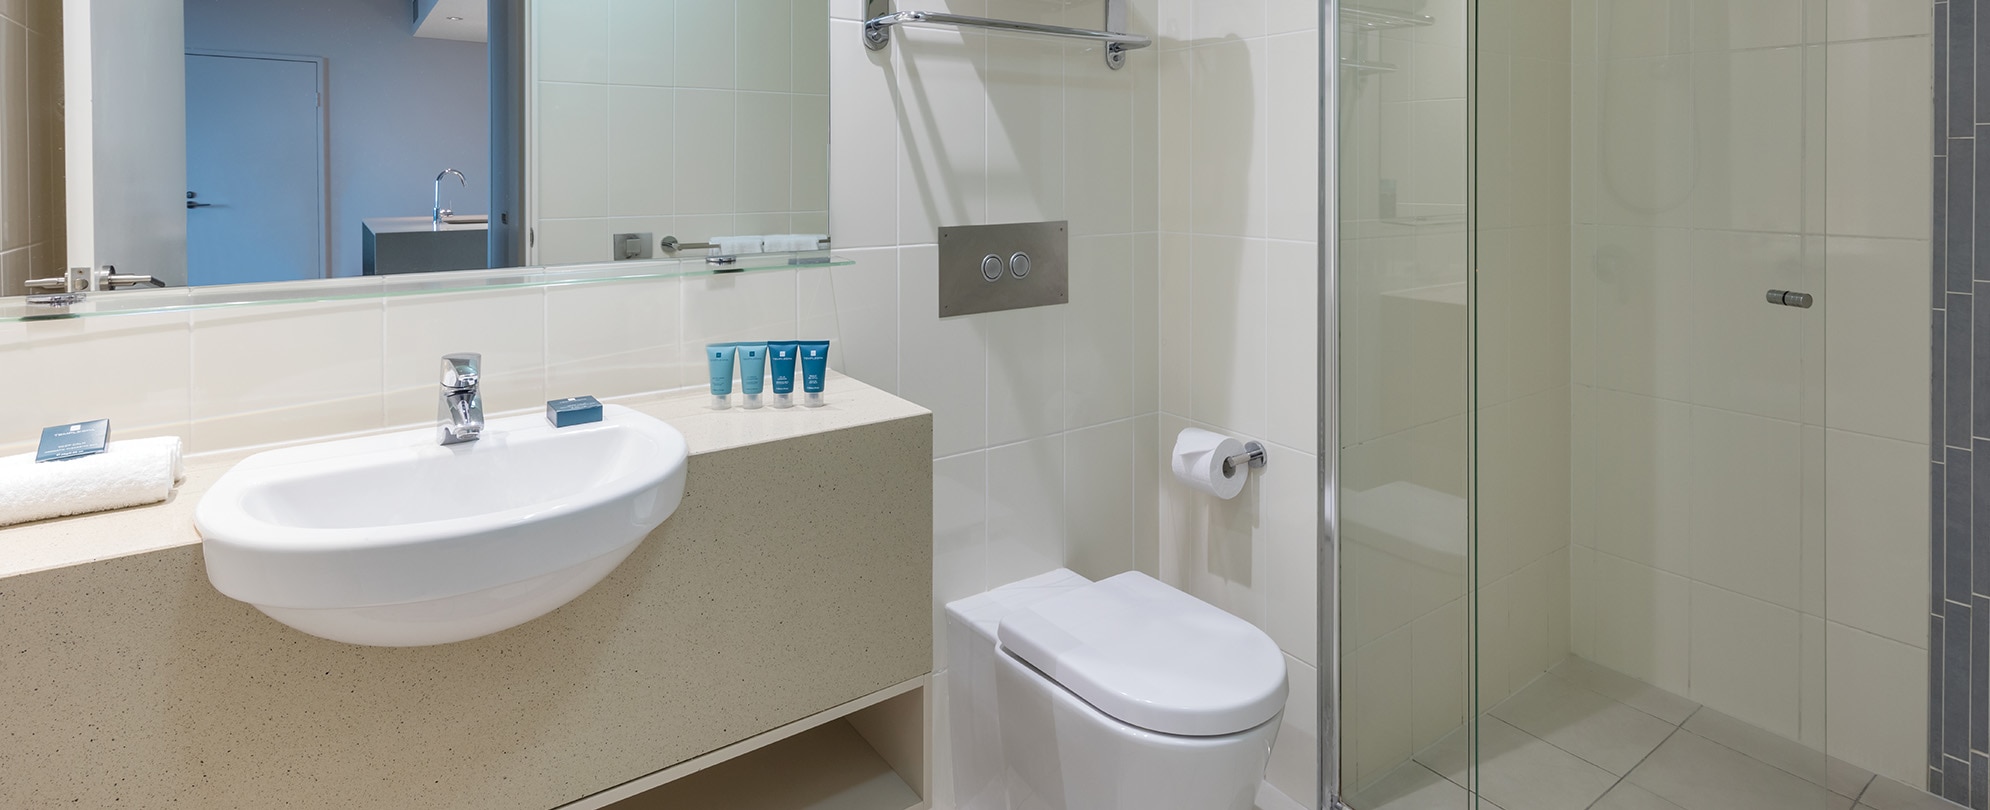 A bathroom with a walk-in shower in a 1-bedroom suite at Club Wyndham Surfers Paradise.